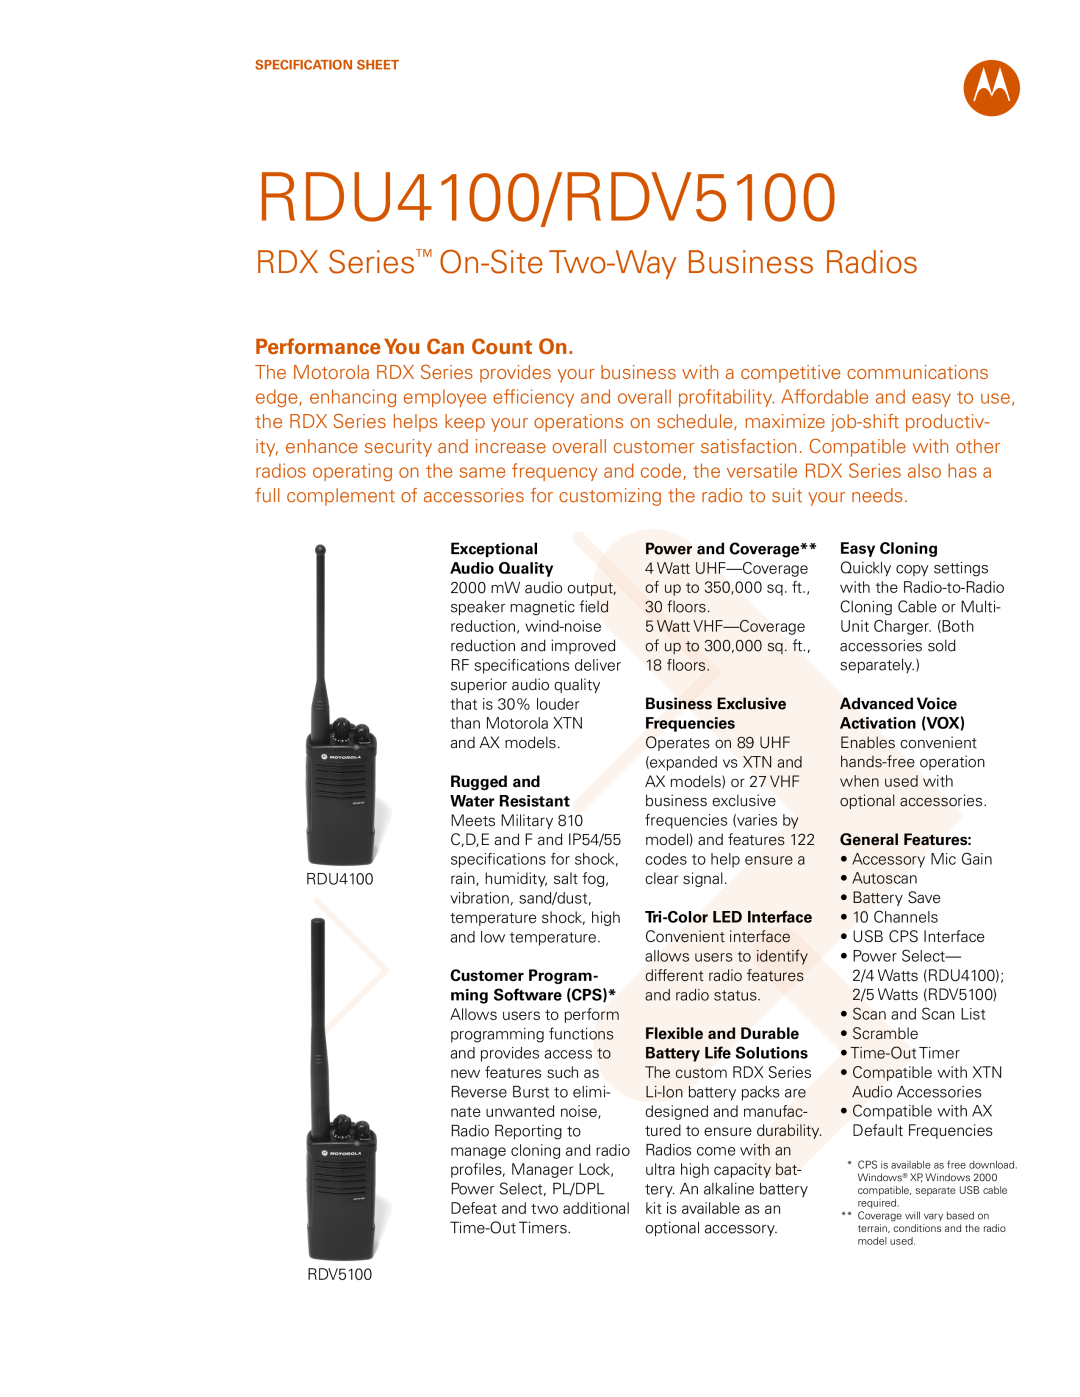 Motorola specifications RDU4100/RDV5100, RDX Series On-Site Two-Way Business Radios, Performance You Can Count On 